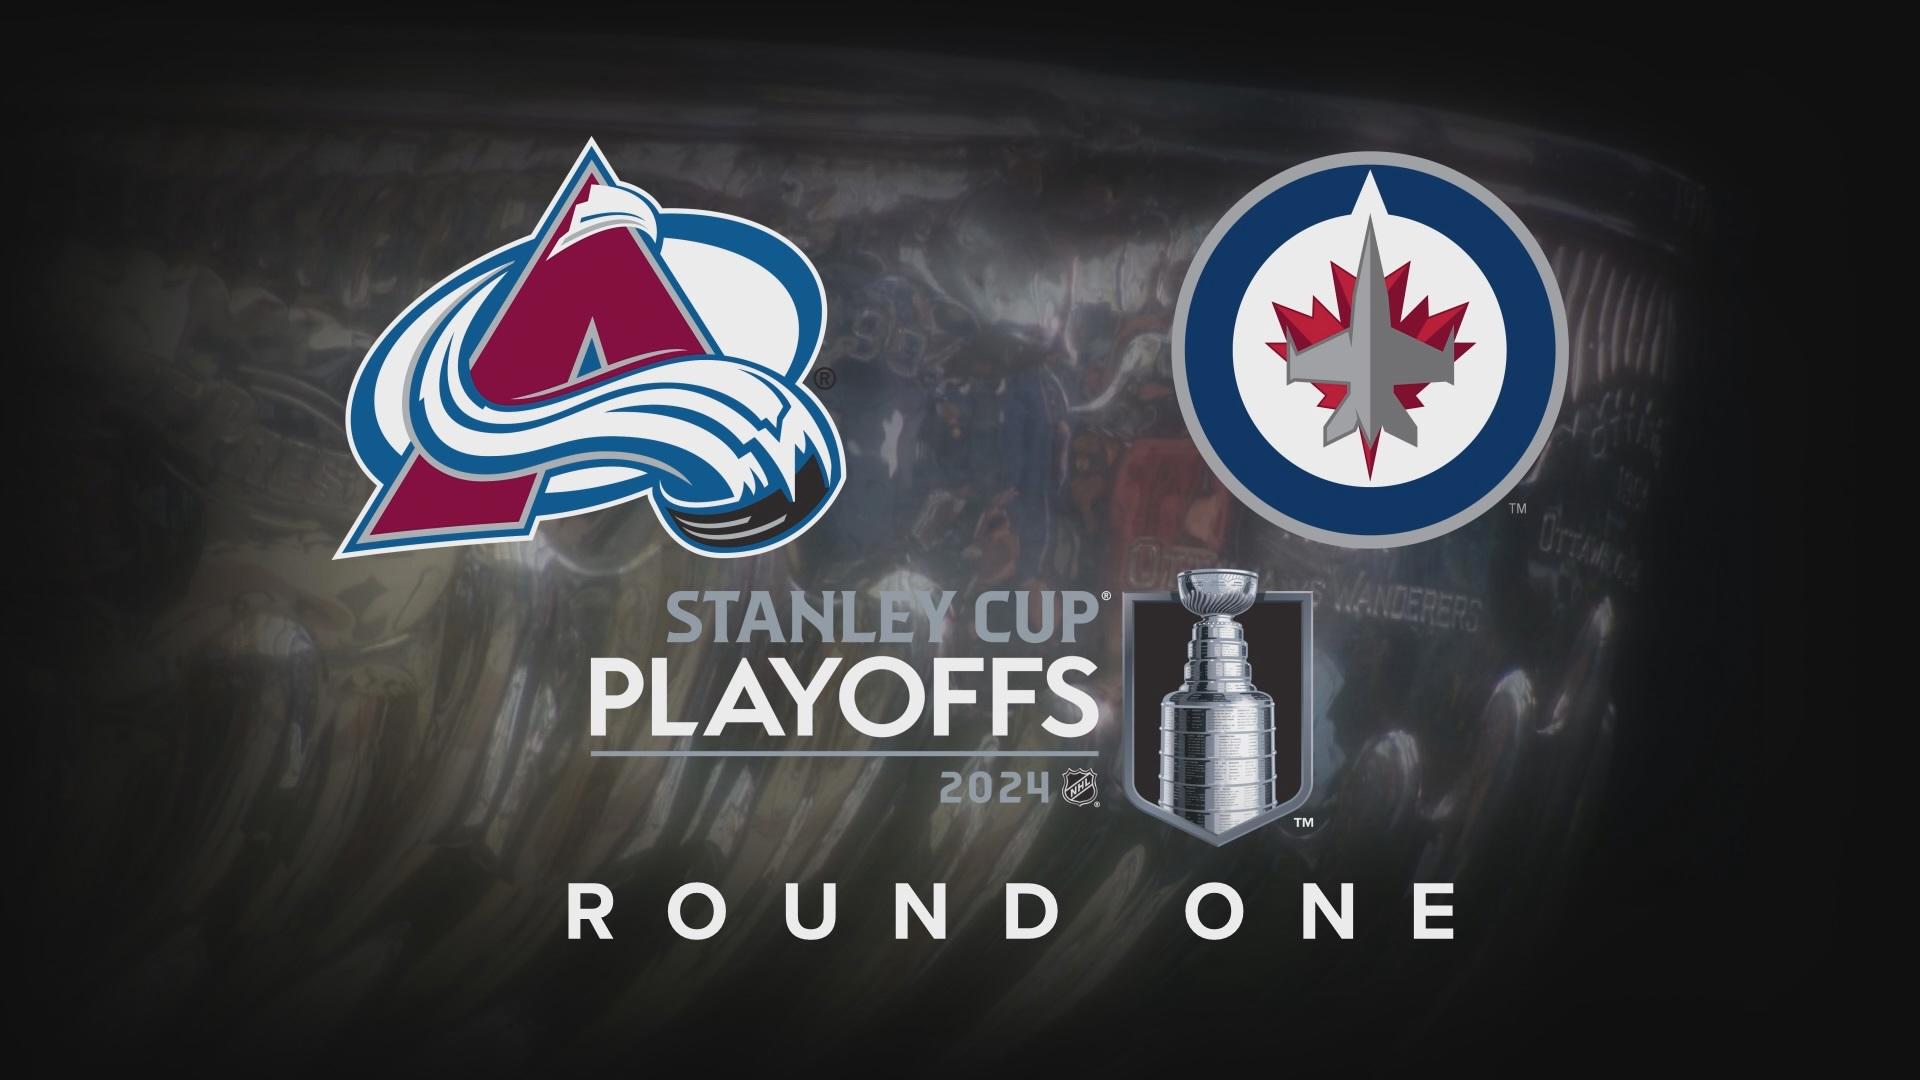 The Colorado Avalanche are up 3-1 on the Winnipeg Jets in their opening-round NHL playoff series.